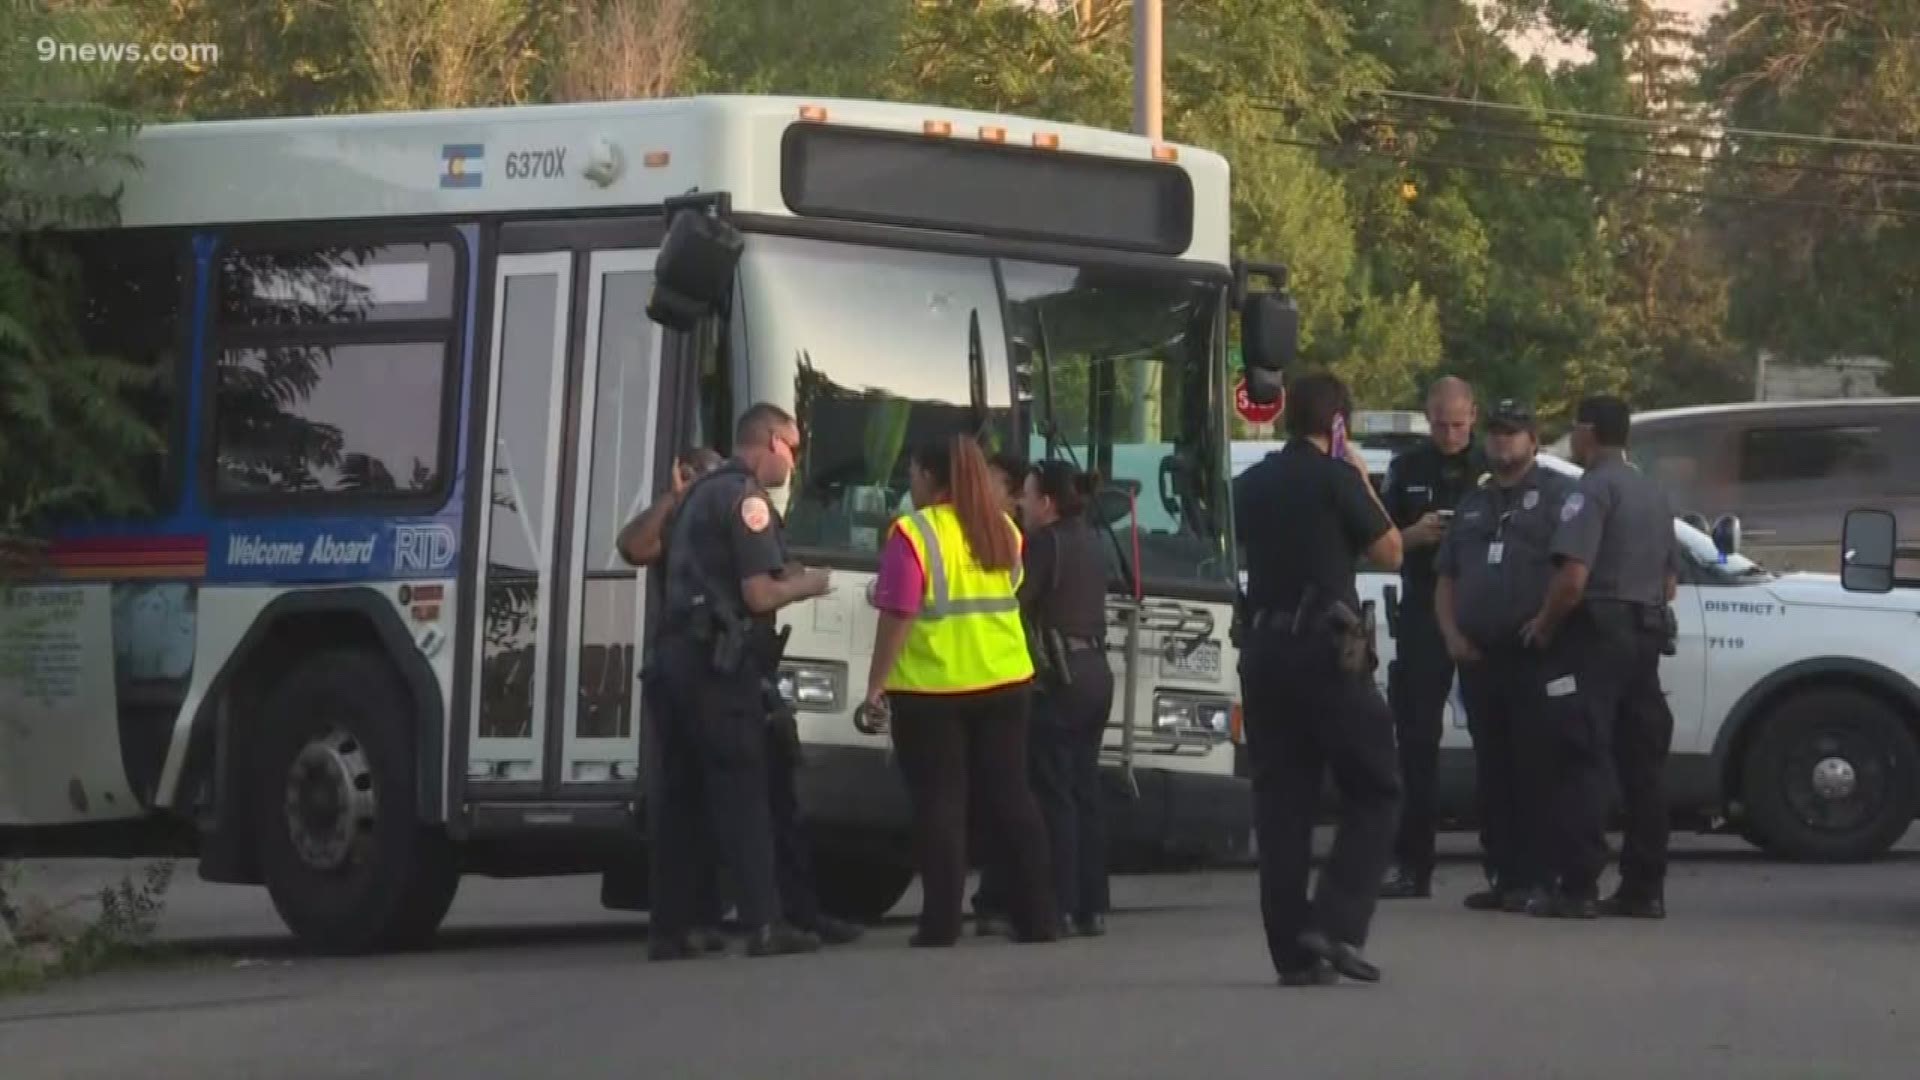 Police said the suspect stole an RTD bus, with a driver but no passengers on board, at Federal Boulevard and Howard Place and then crashed into a retaining wall.